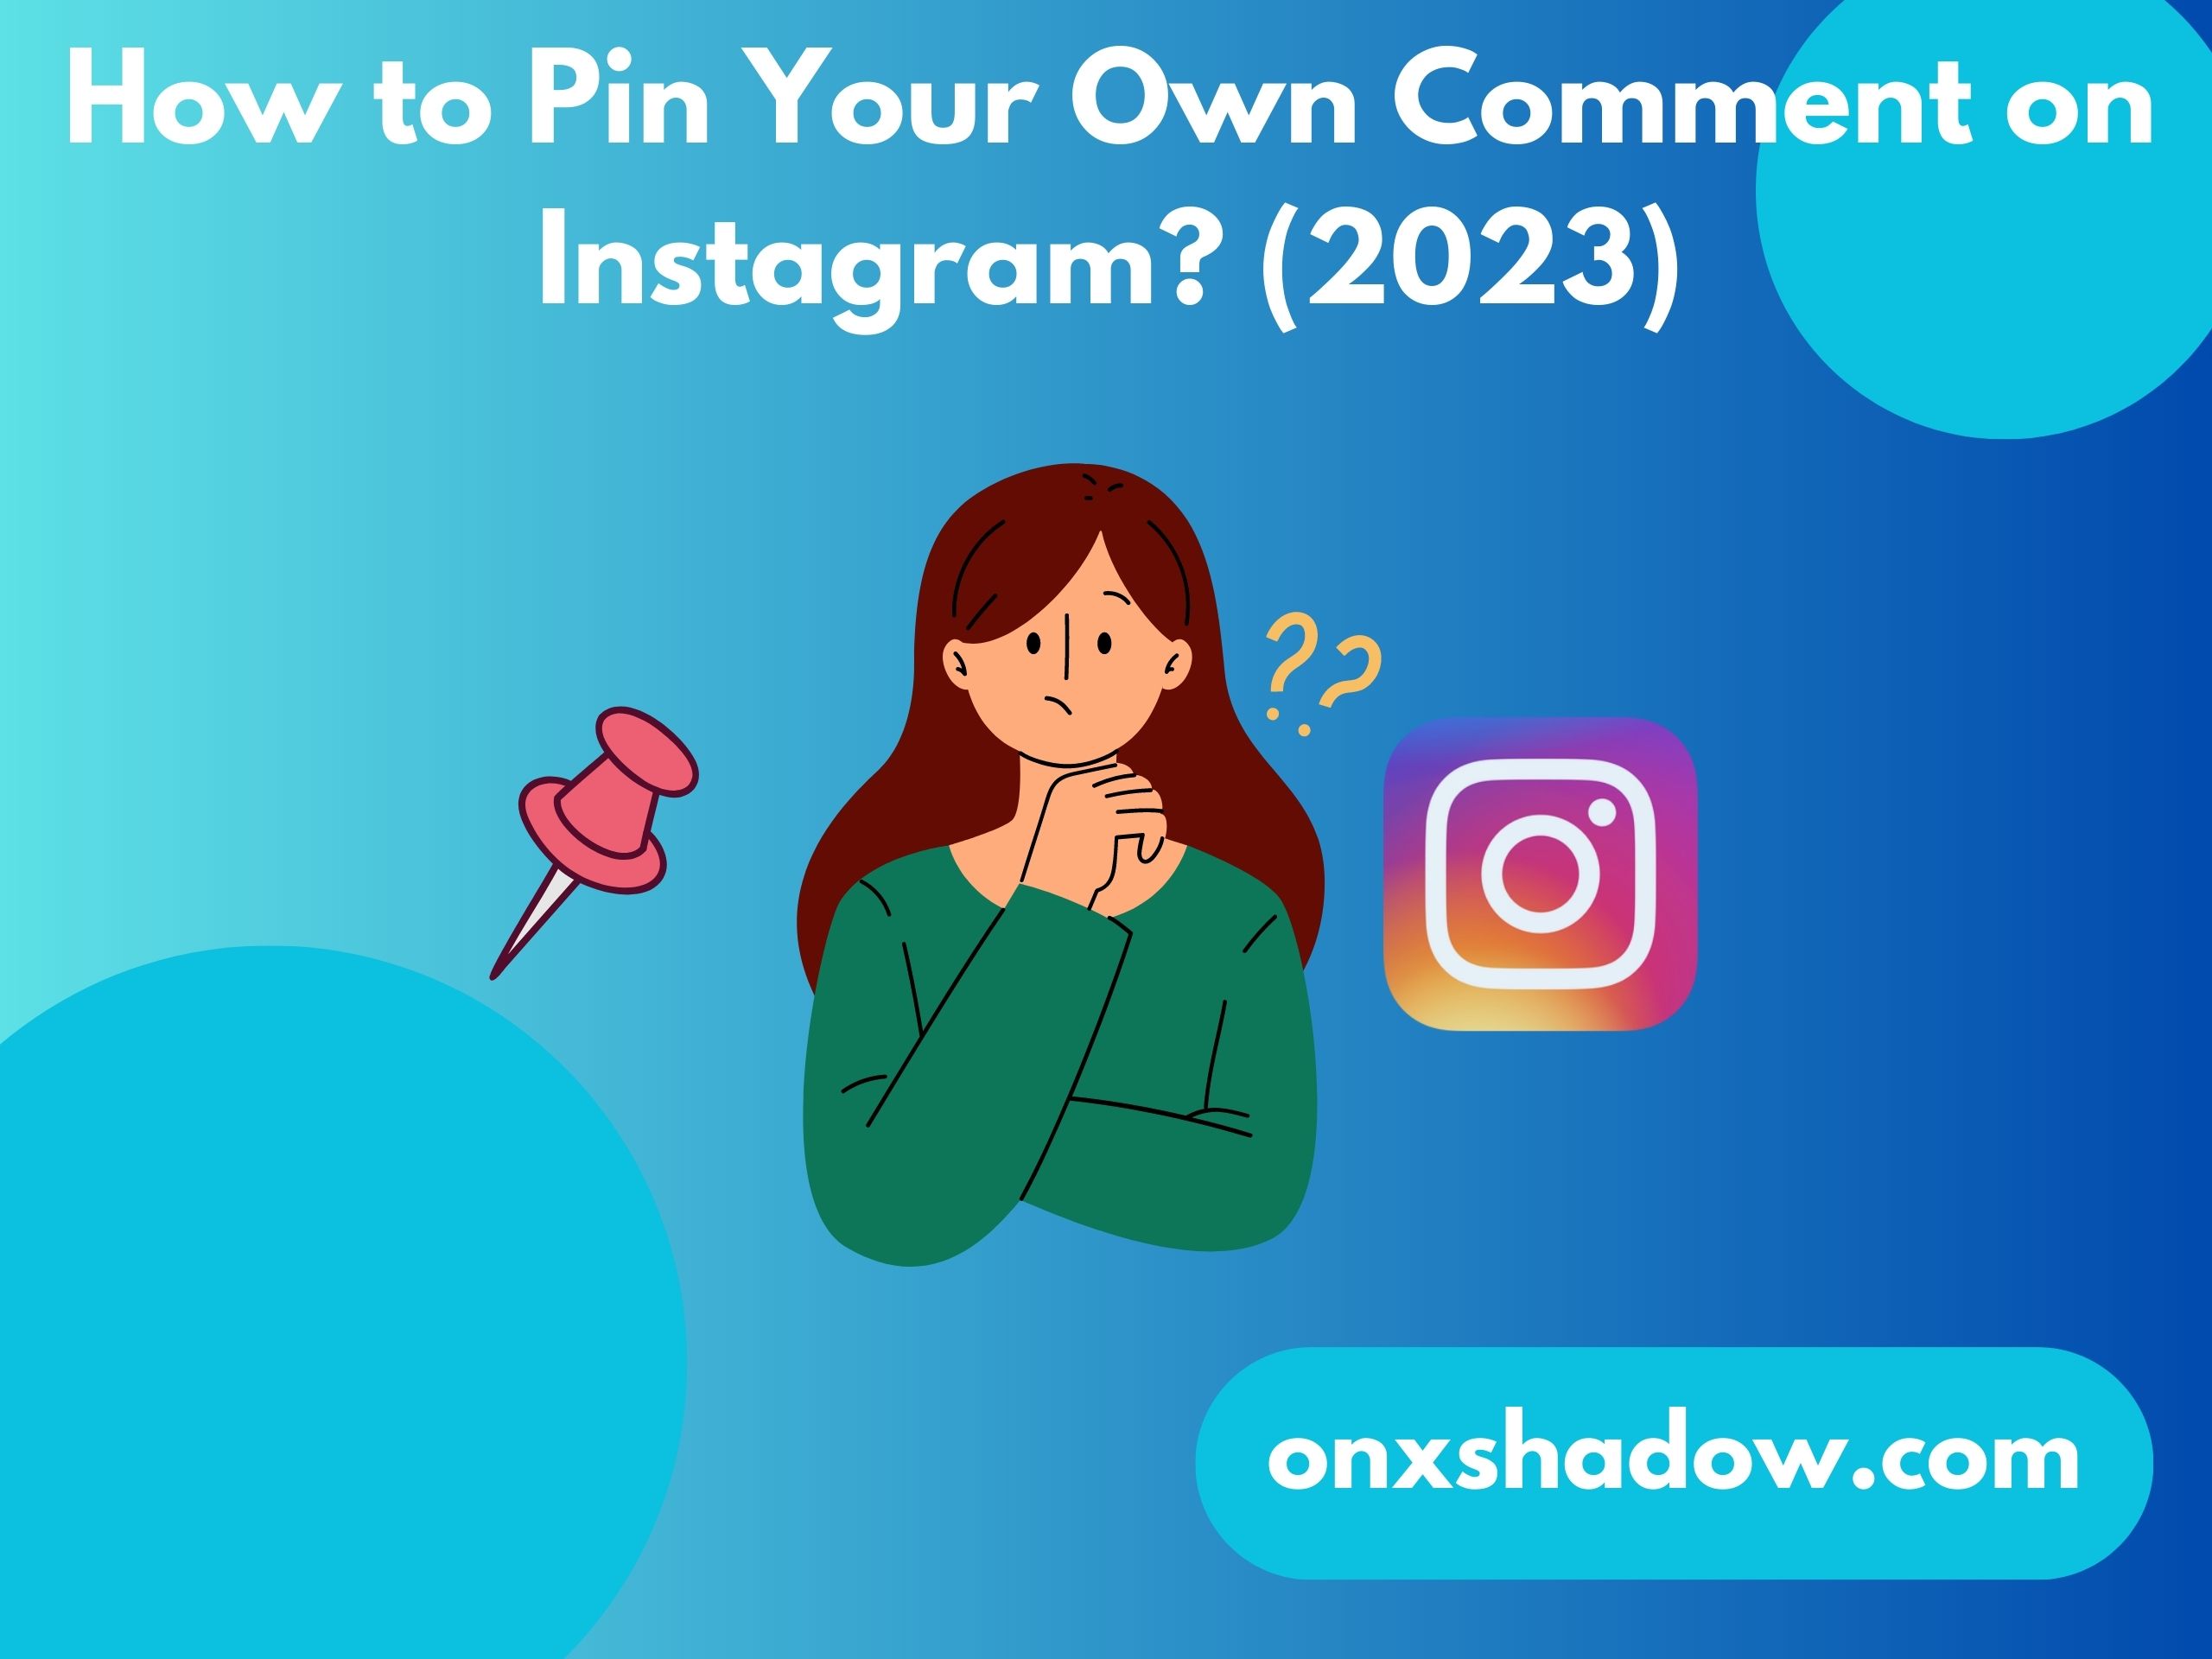 How to Pin Your Own Comment on Instagram? (2023)